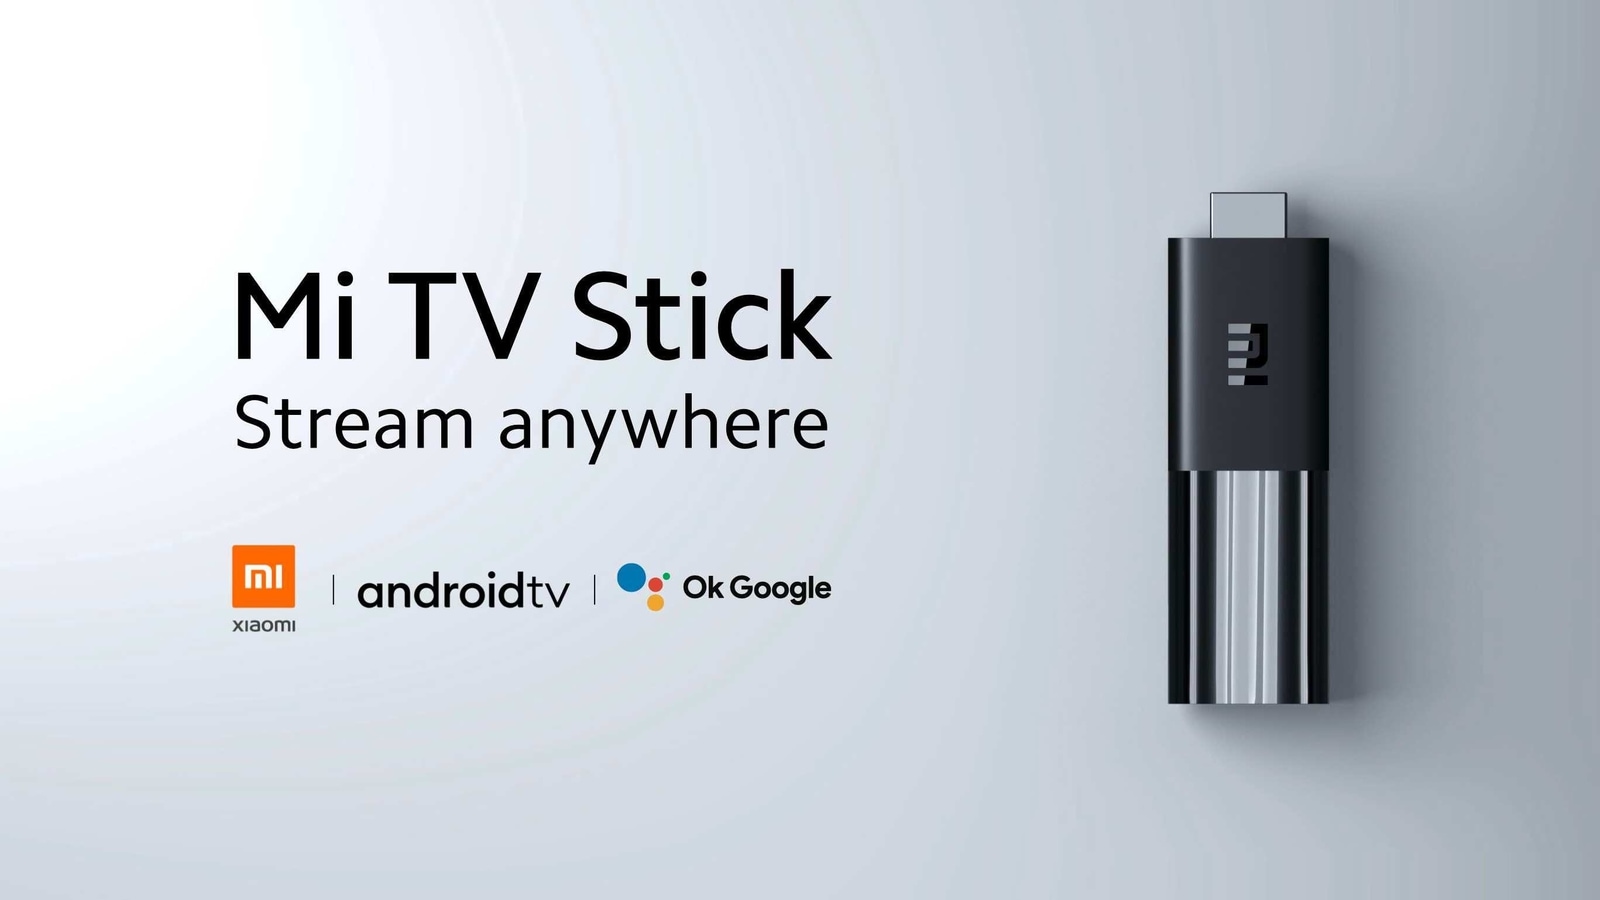 Xiaomi TV Stick 4K with built-in Chromecast launched in India